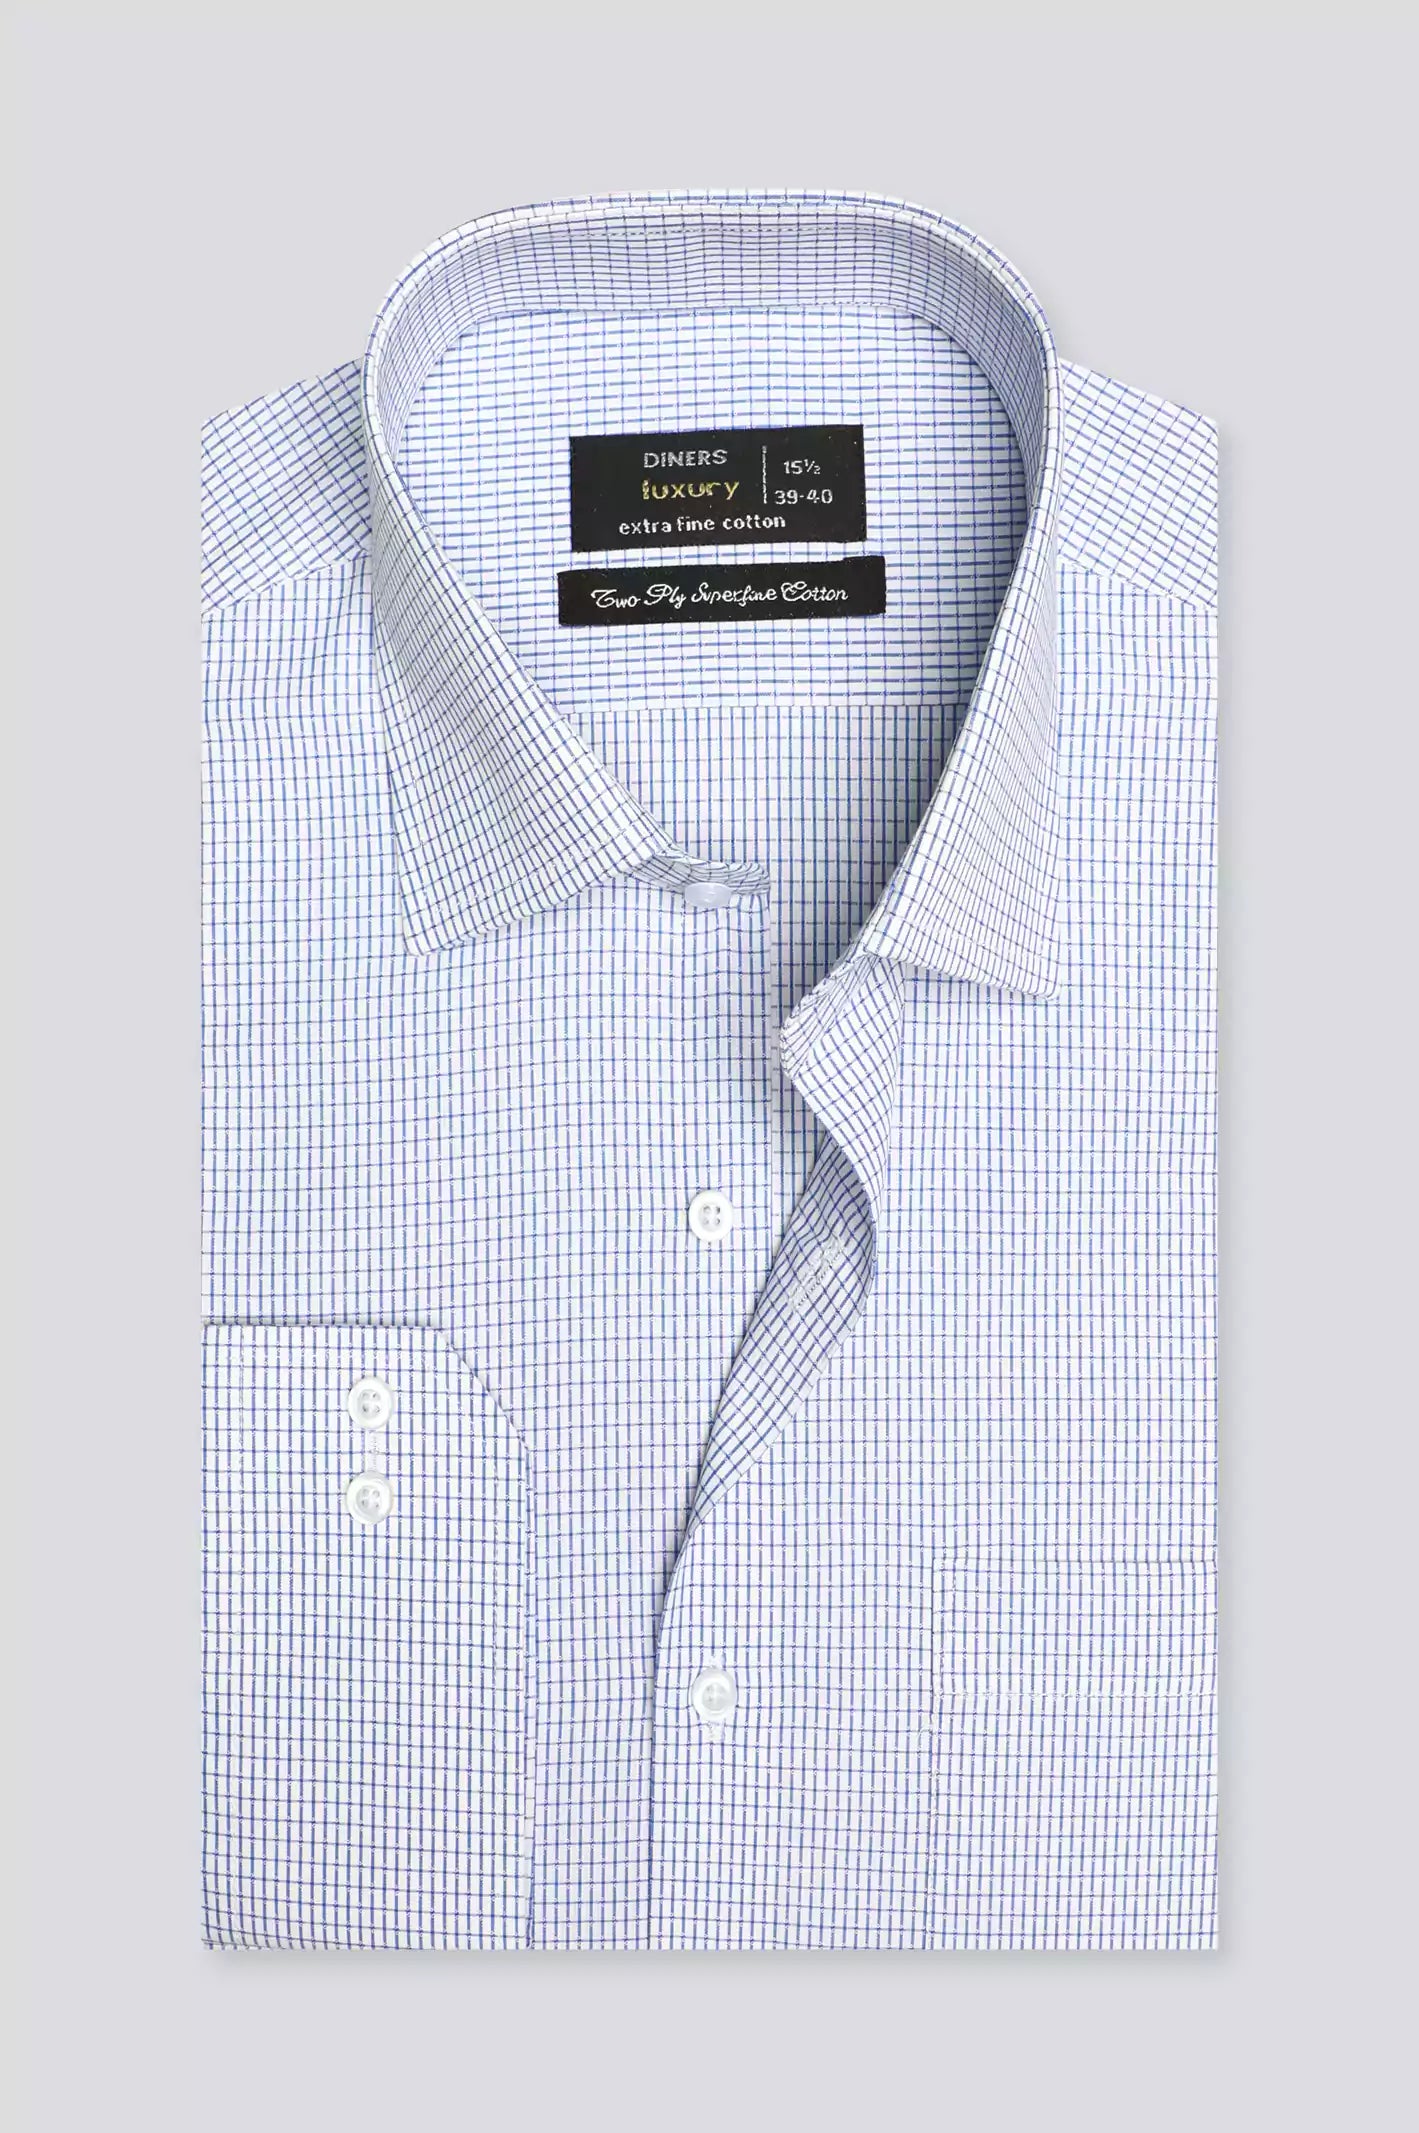 Blue Self Textured Formal Shirt From Diners